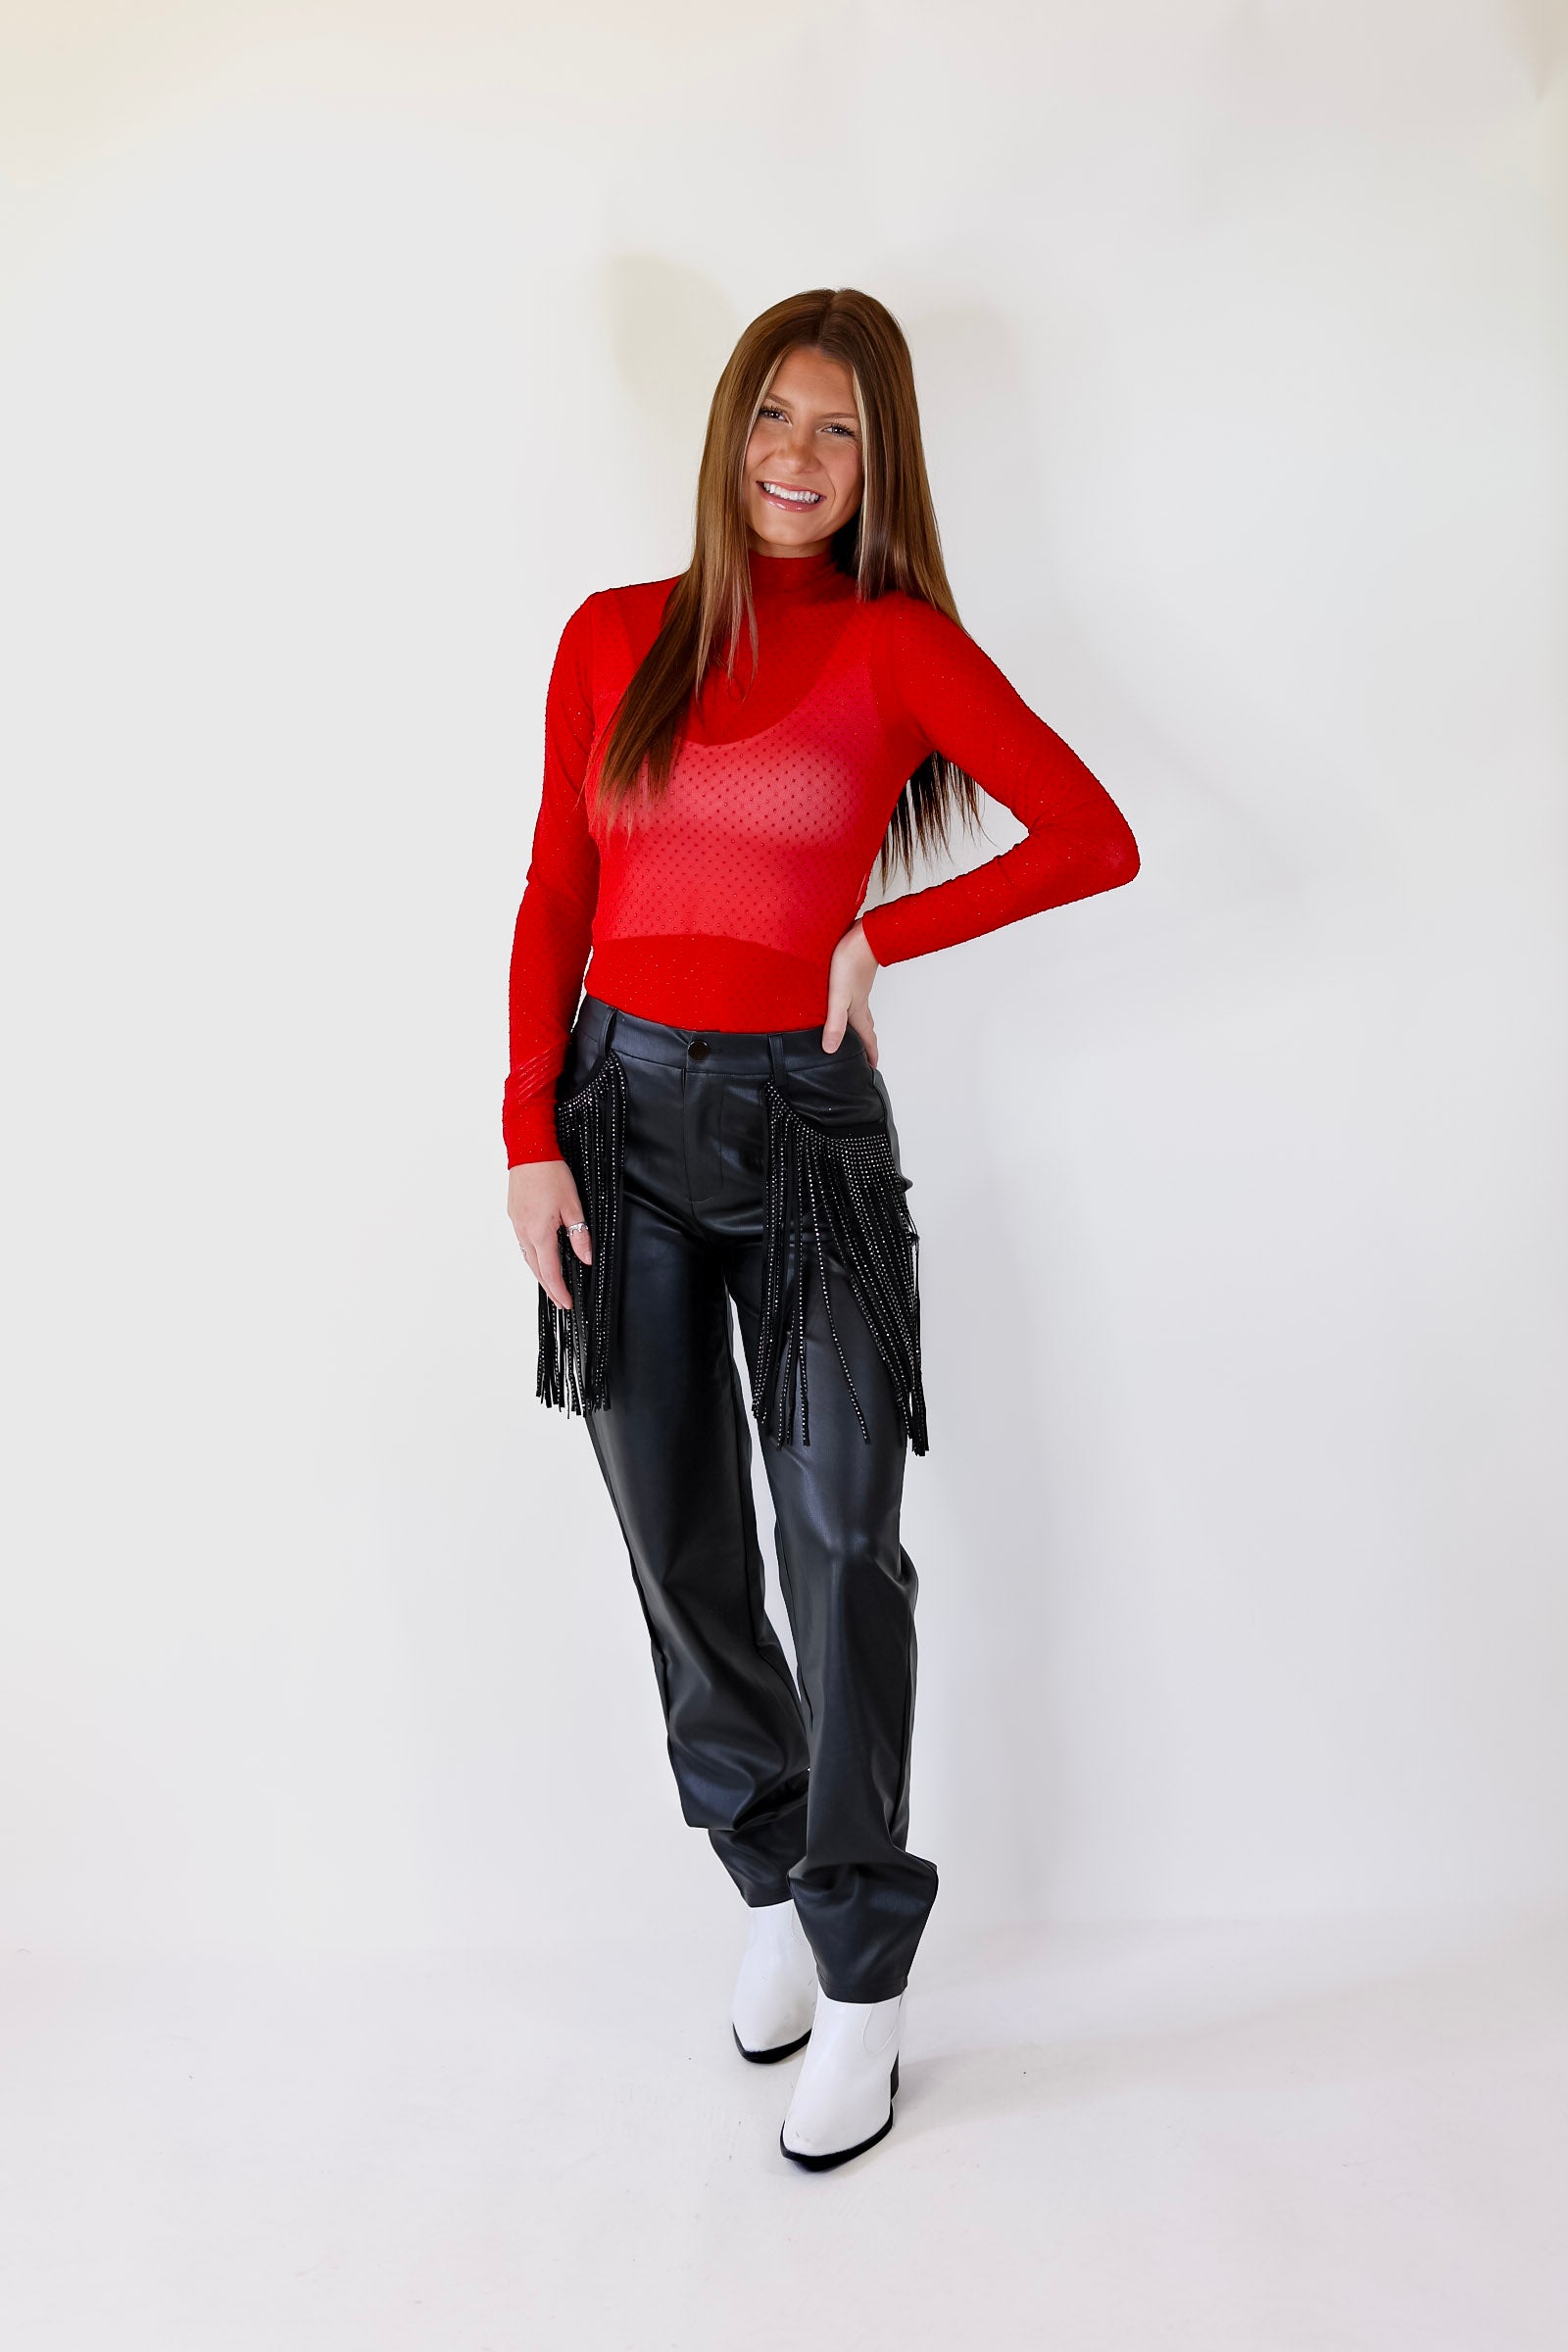 Try Your Luck Glitter Mesh Long Sleeve Bodysuit in Red - Giddy Up Glamour Boutique